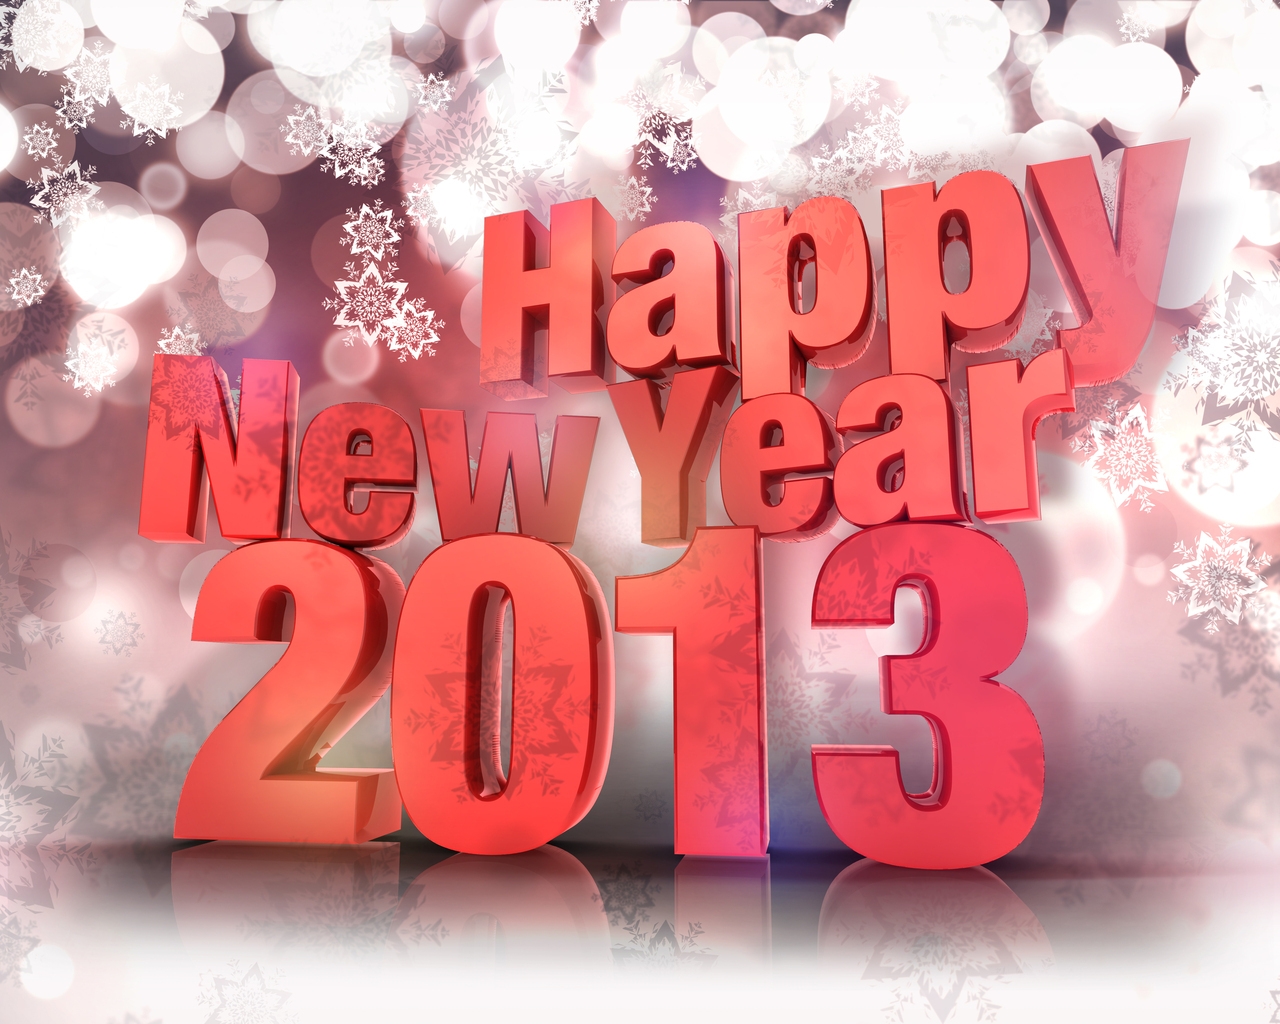 Happy New 2013 for 1280 x 1024 resolution